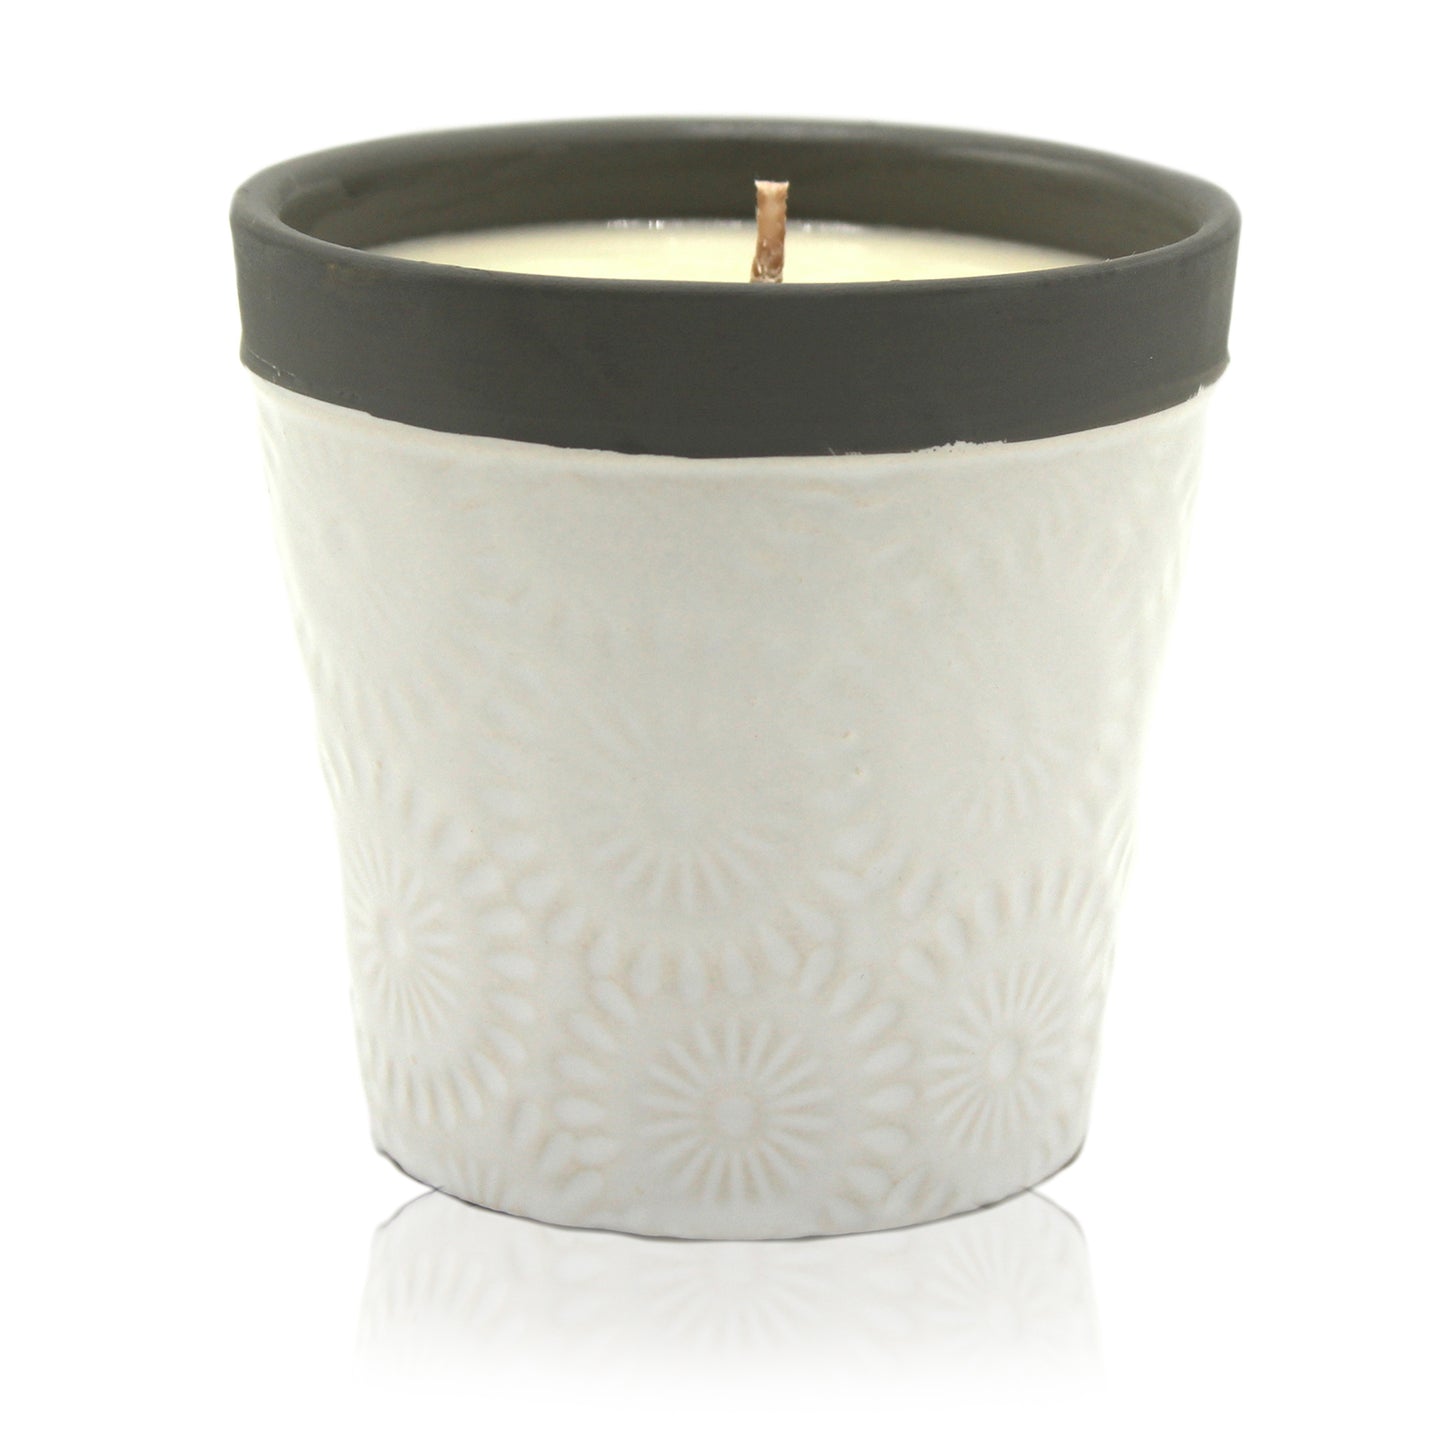 Forever Vanilla - Home is Home Candle Pots 320 Grams